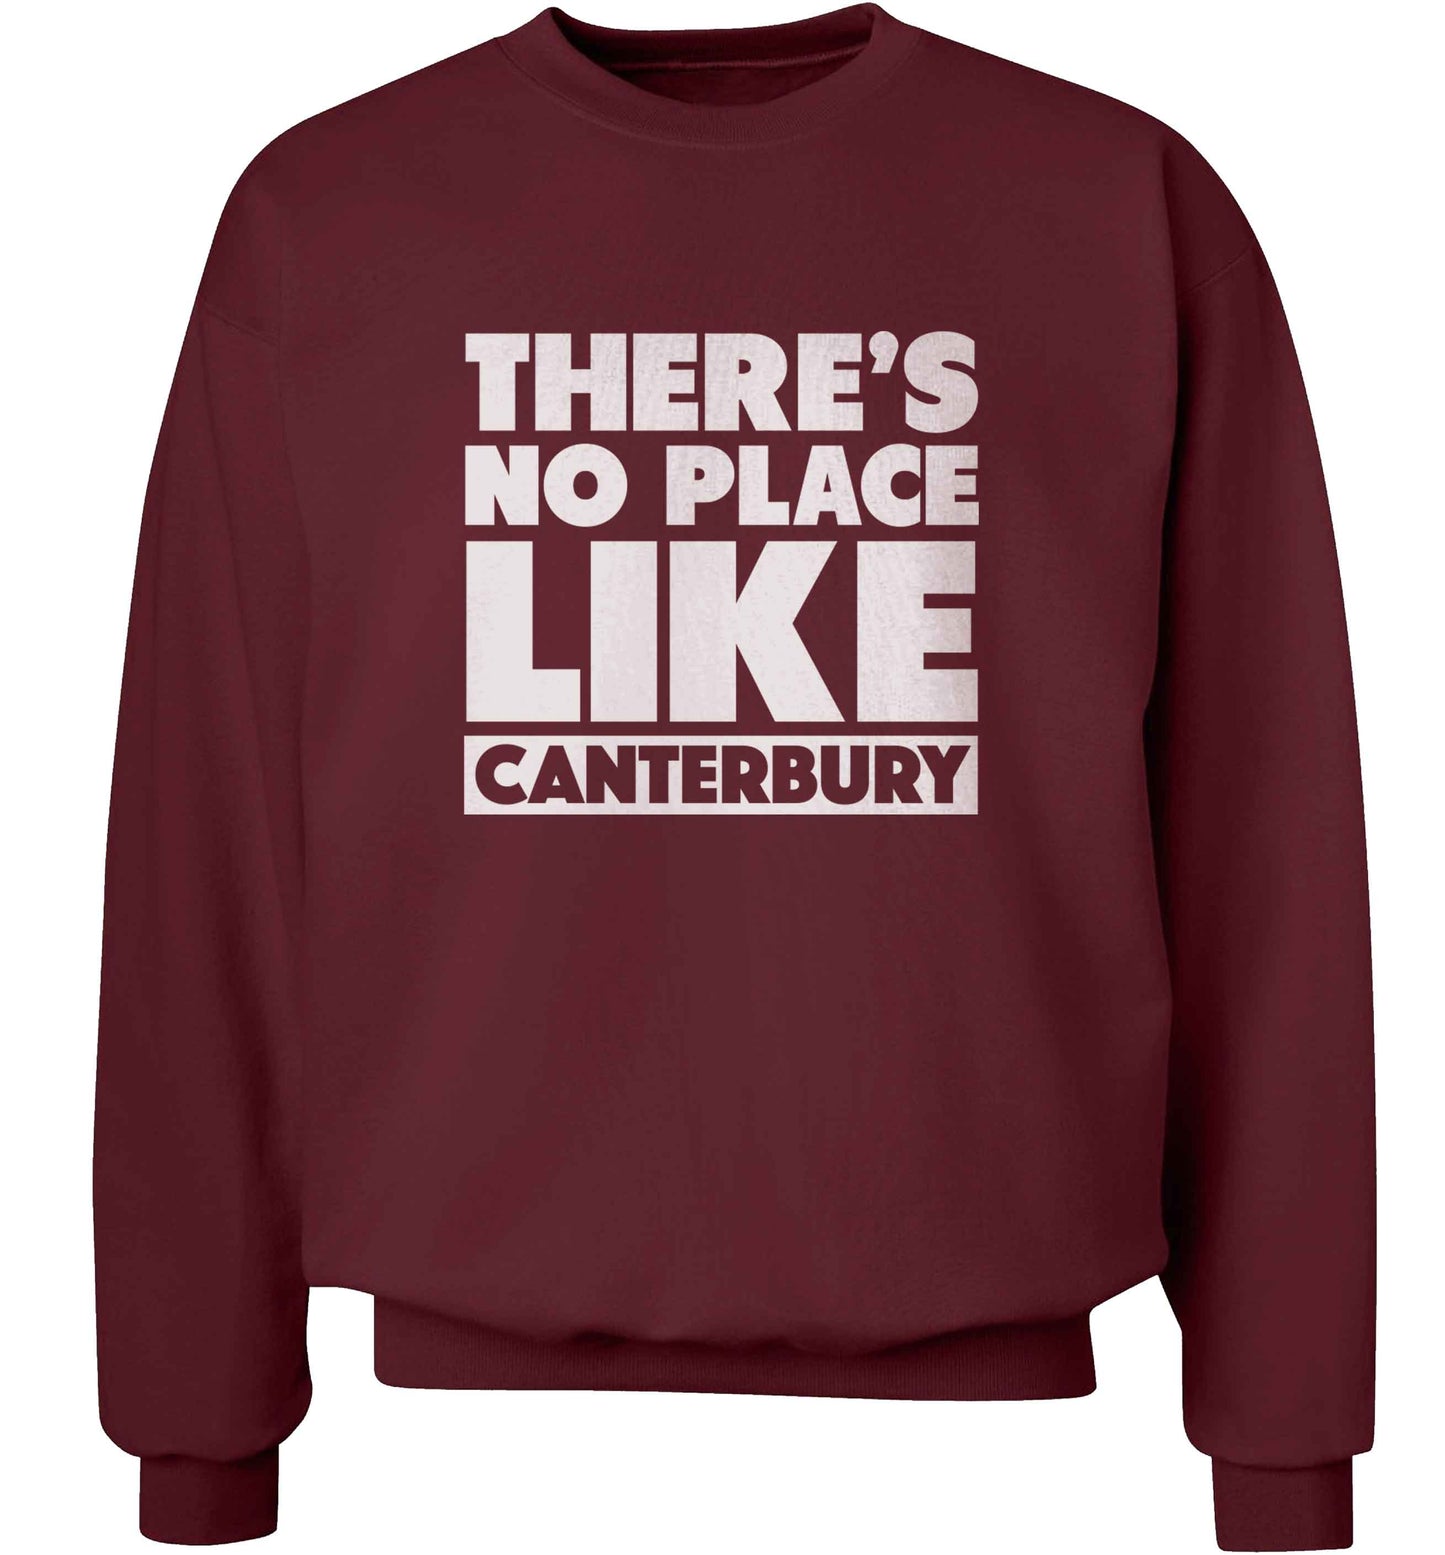 There's no place like Canterbury adult's unisex maroon sweater 2XL